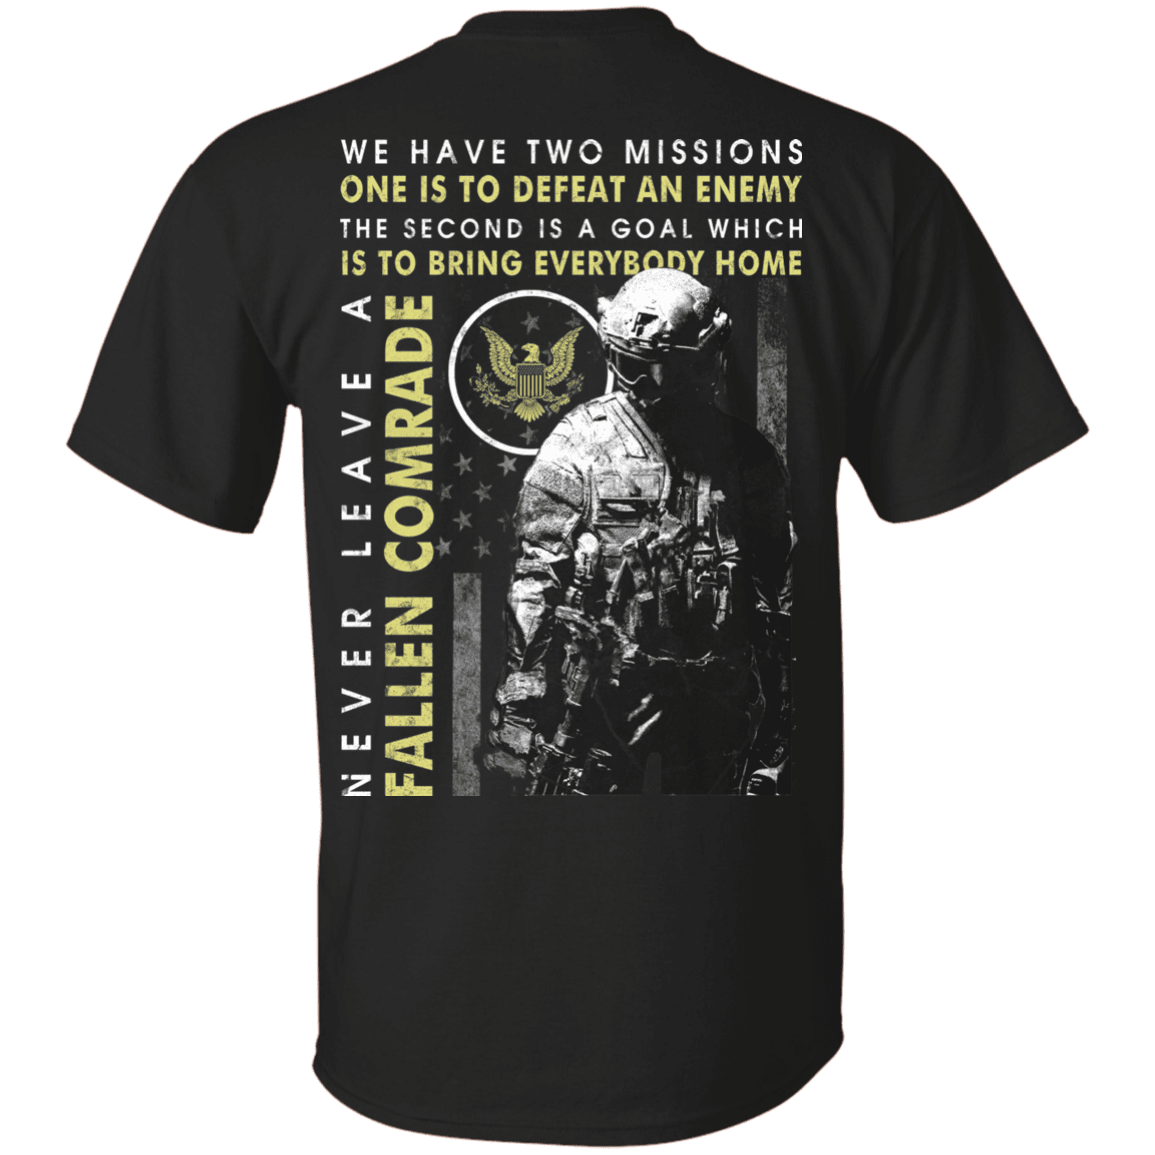 Never Leave A Fallen Comrade Army Men Back T Shirts-TShirt-Army-Veterans Nation